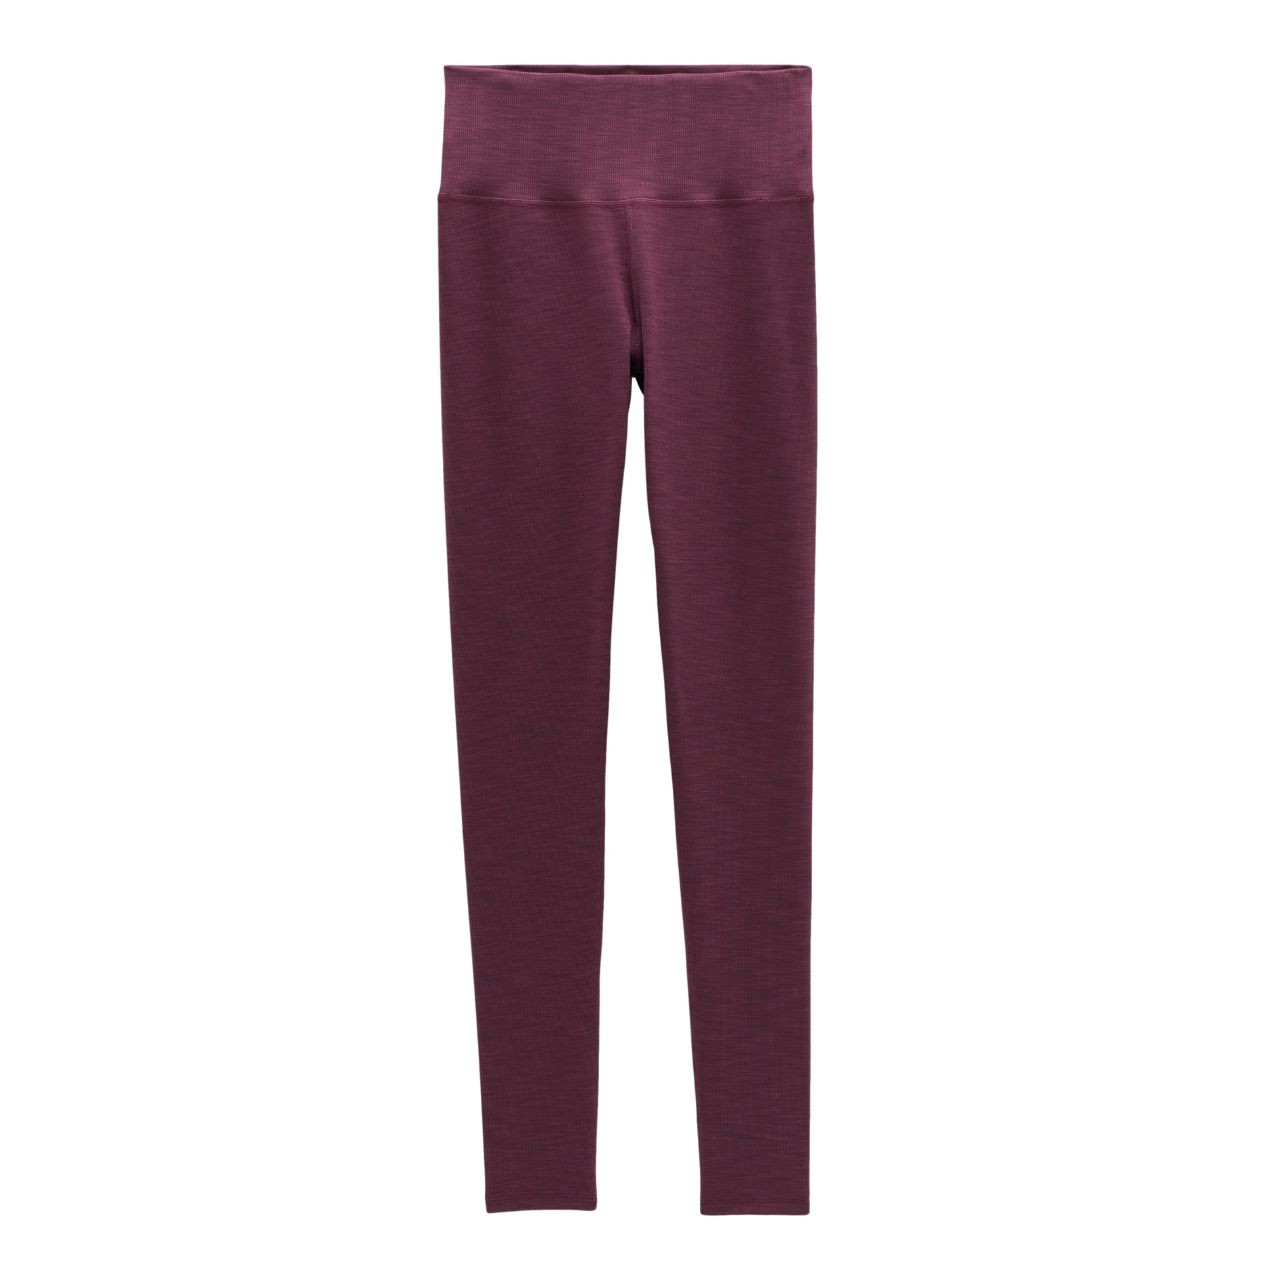 prAna Becksa 7/8 Legging Pants, Mink Heather, Large, — Womens Clothing  Size: Large, Inseam Size: 25 in, Gender: Female, Age Group: Adults —  W41180589-MNHT-L — 66% Off - 1 out of 3 models